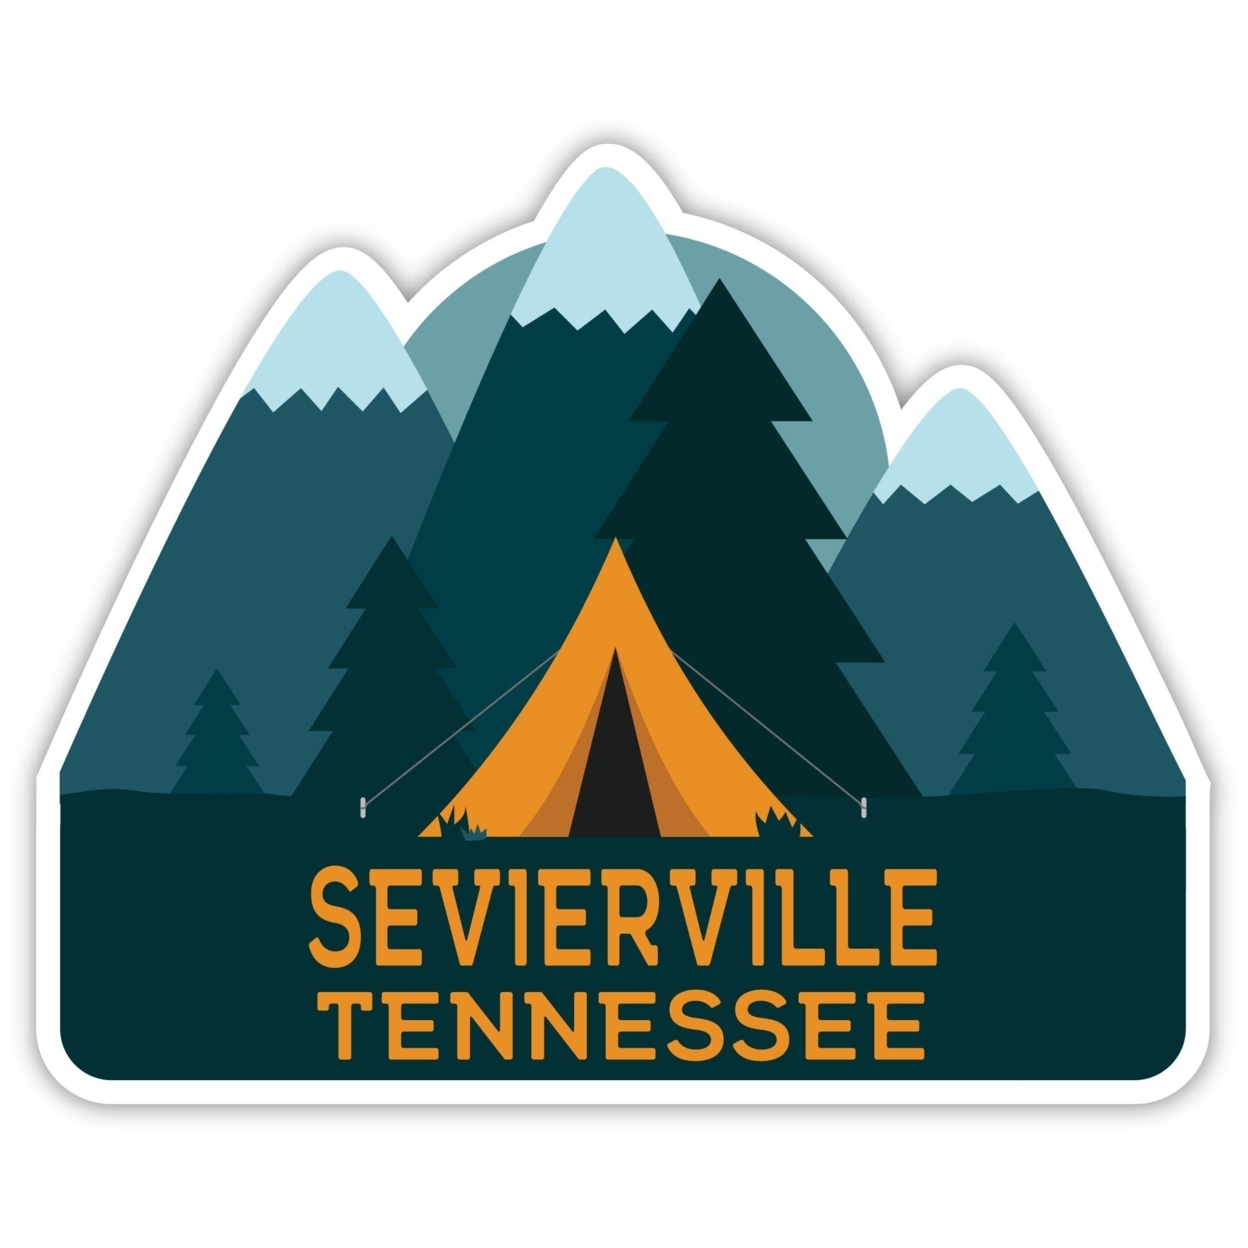 Sevierville Tennessee Souvenir Decorative Stickers (Choose Theme And Size) - Single Unit, 2-Inch, Bear